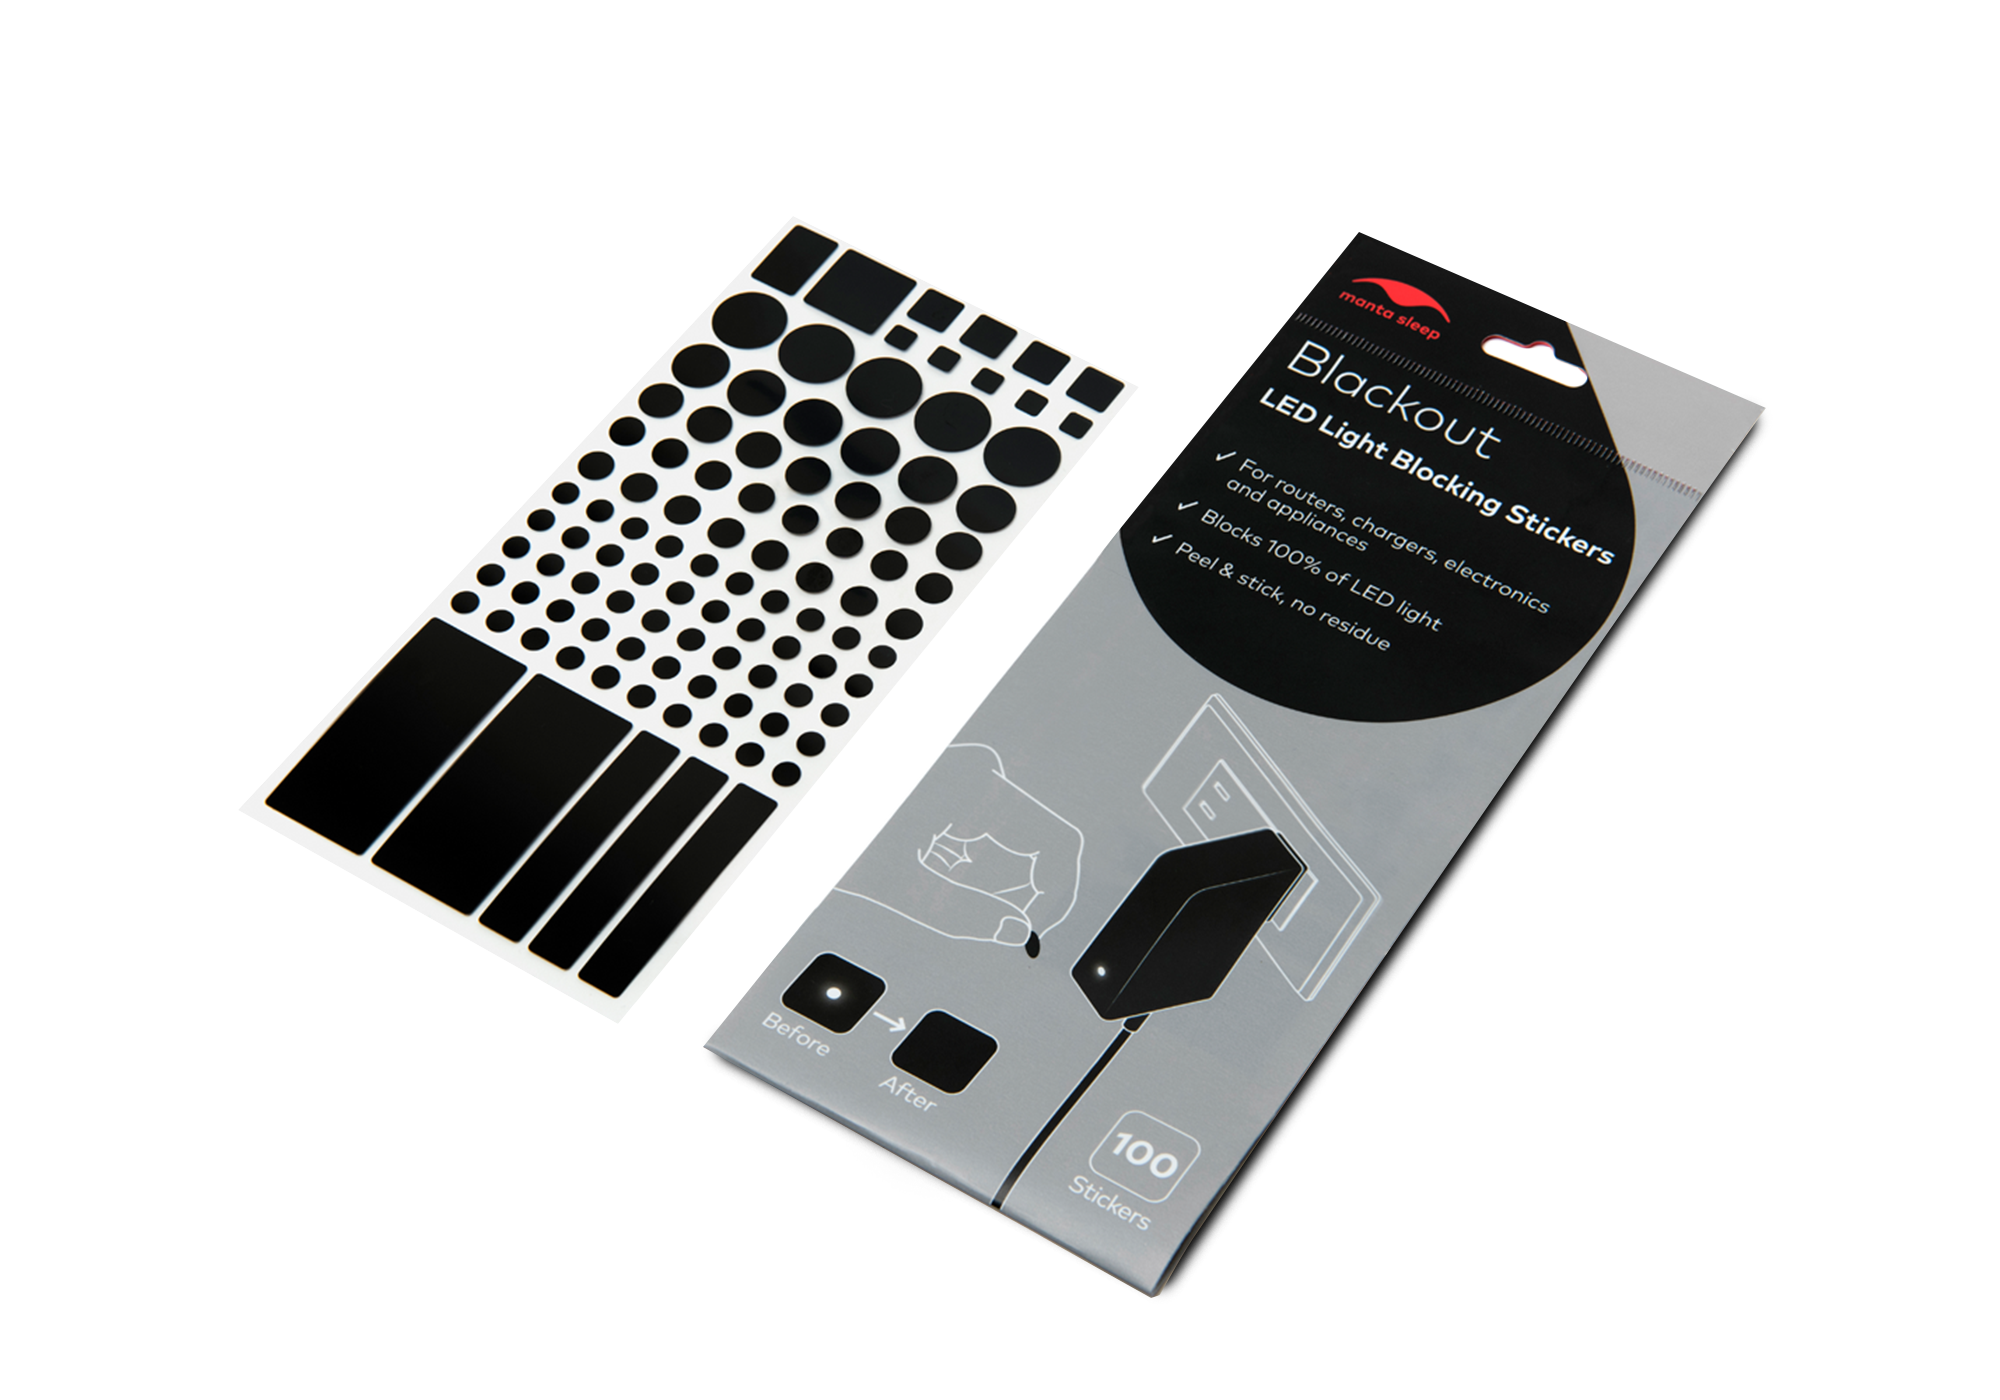 A pack of 100 blackout stickers and the packaging are one the best sleep products to keep out disruptive light.